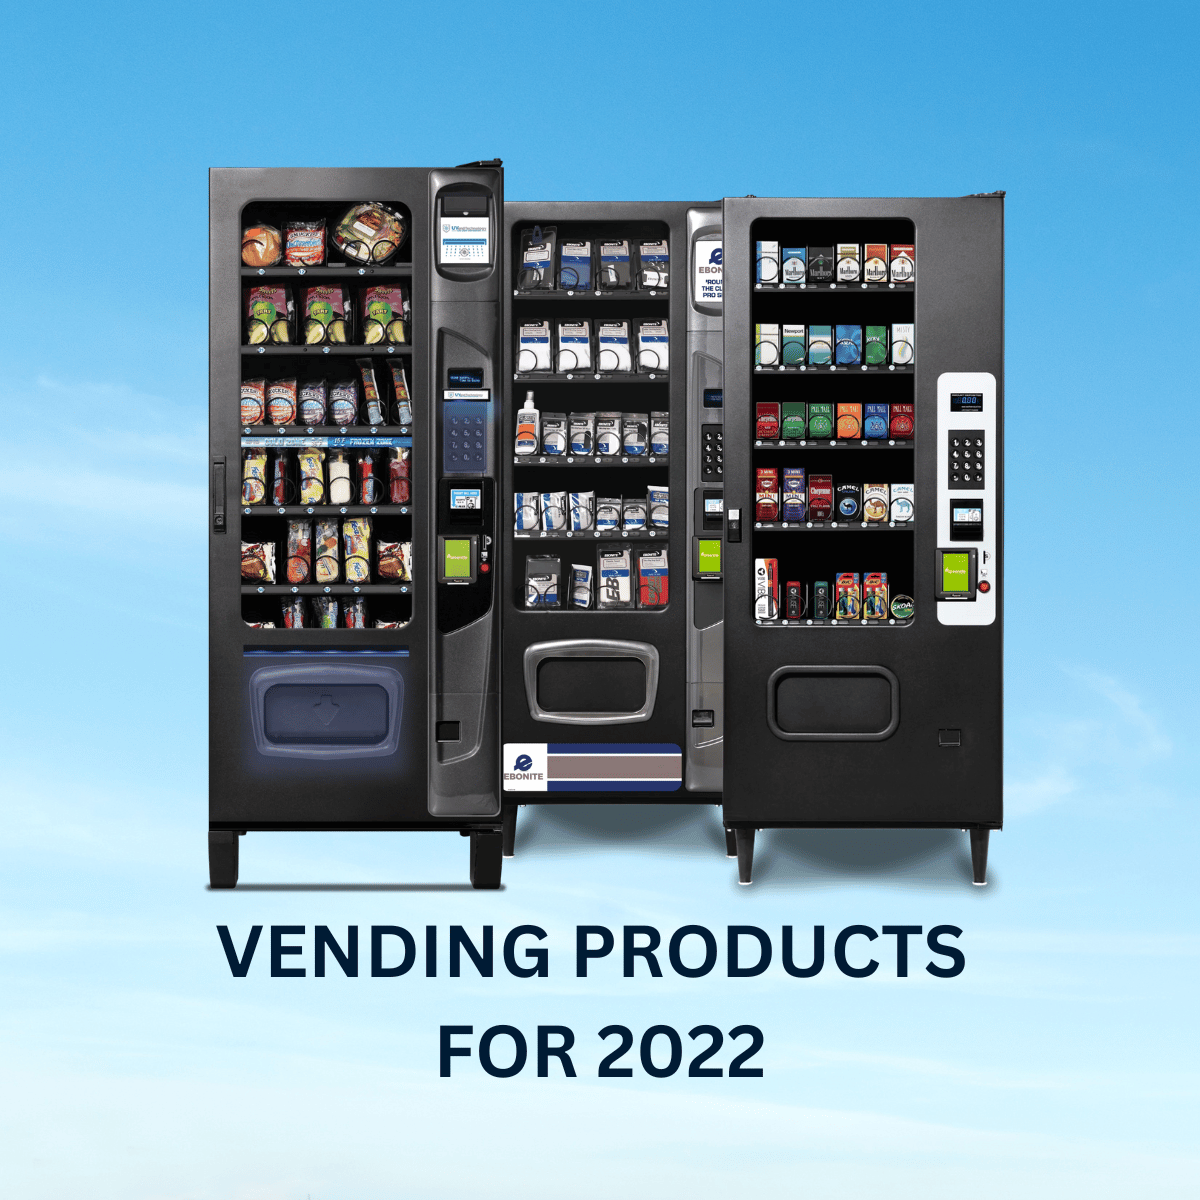 VENDING PRODUCTS FOR 2022